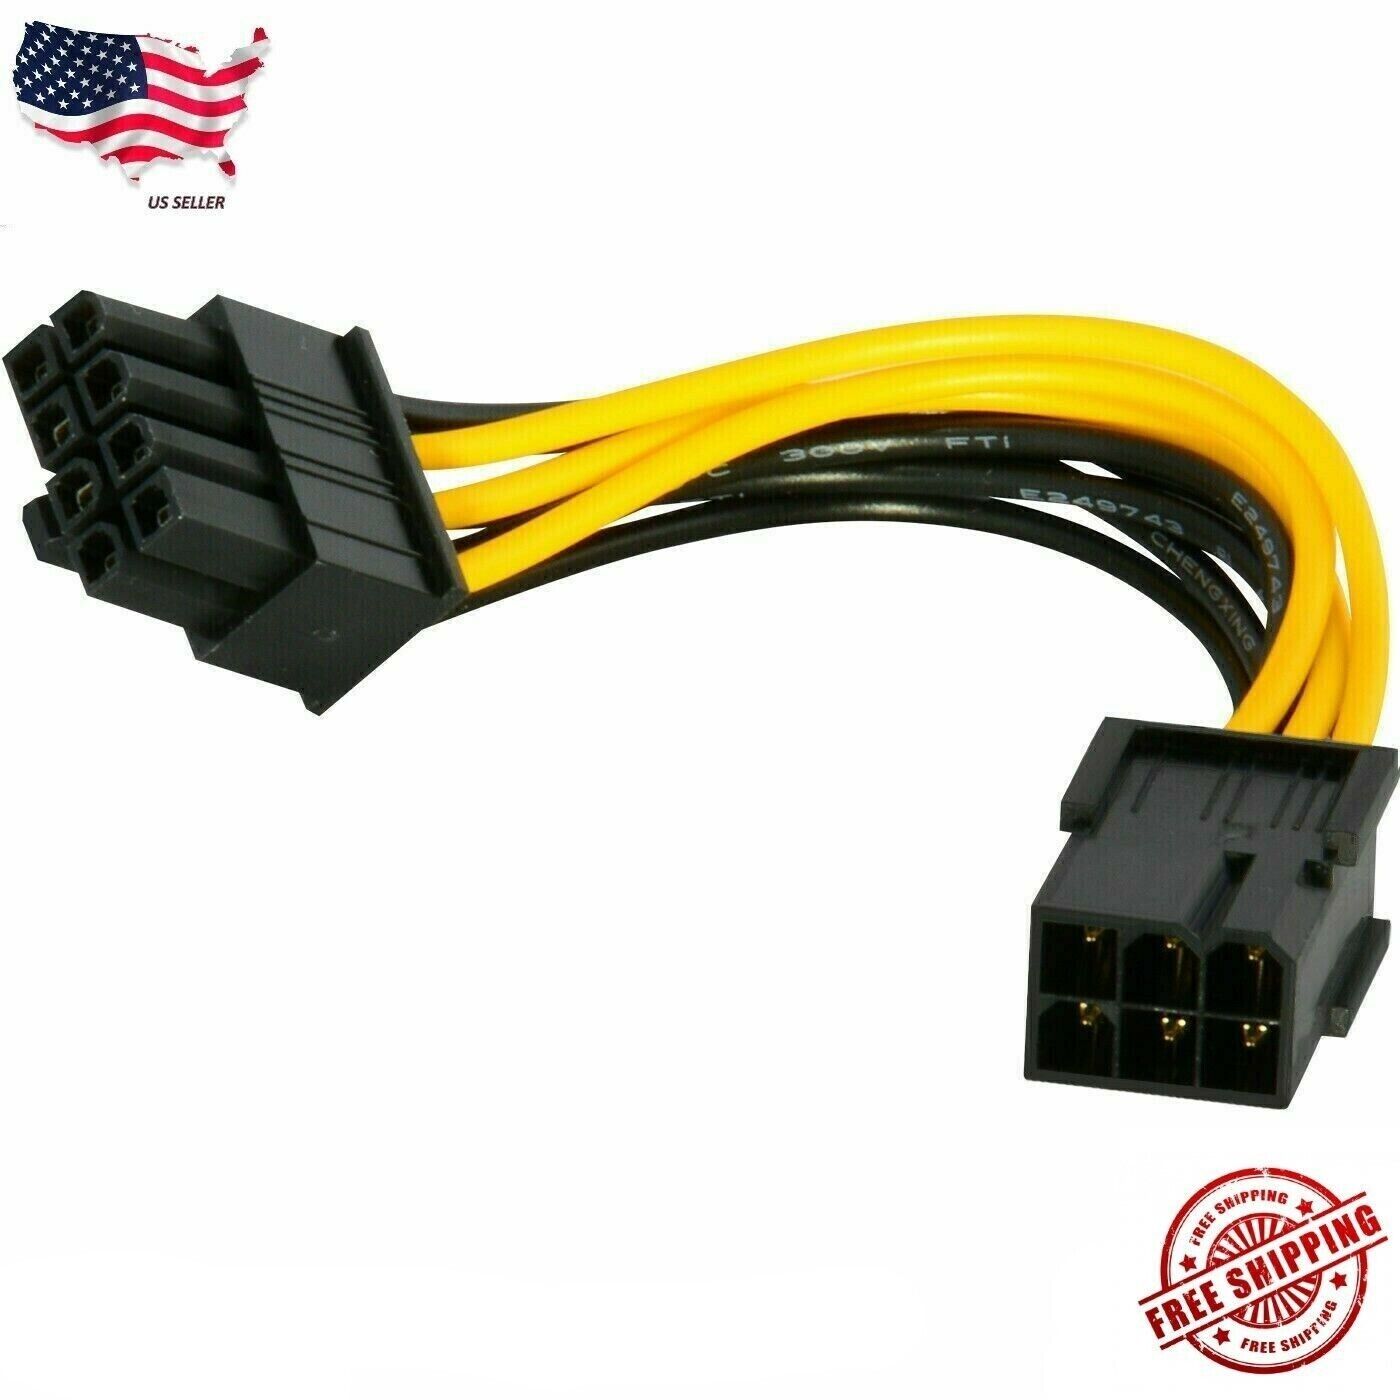 6-pin to 8-pin PCI Express Power Converter Cable for GPU Video Card PCIE PCI-E